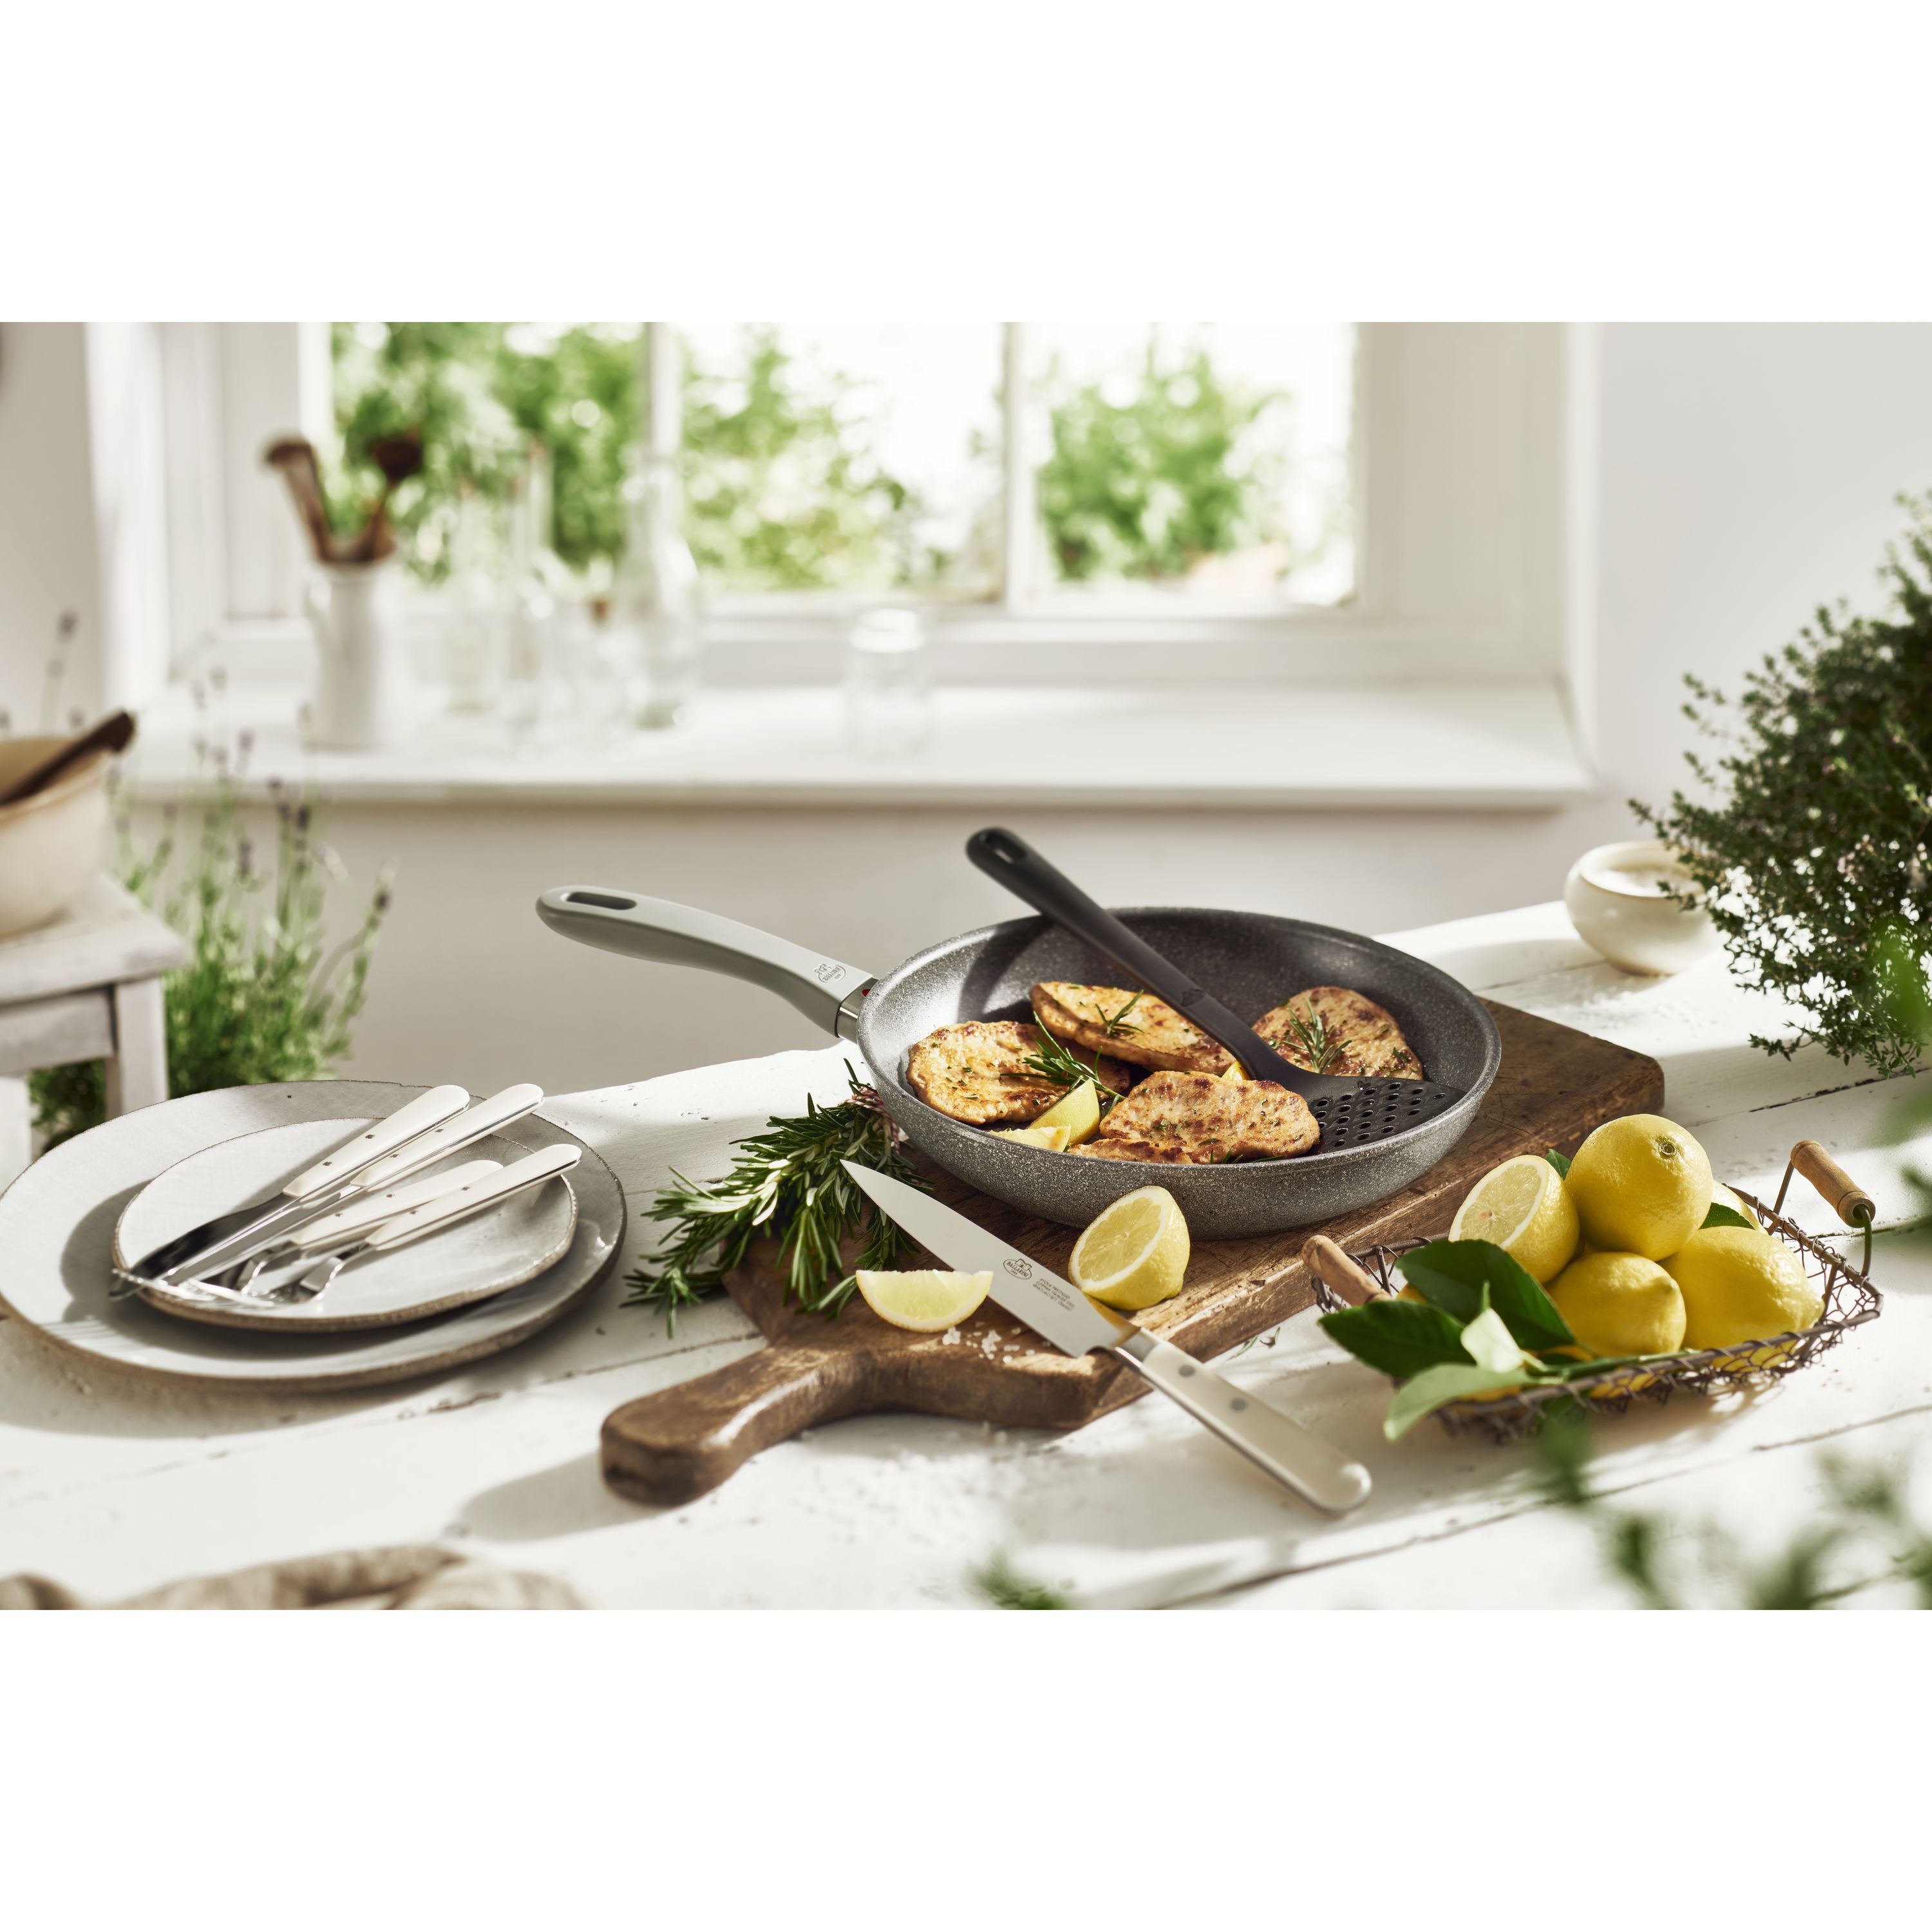 BALLARINI Parma by HENCKELS 3-pc Nonstick Pot and Pan Set, Made in Italy,  Set includes 8-inch, 10-inch and 12-inch fry pan